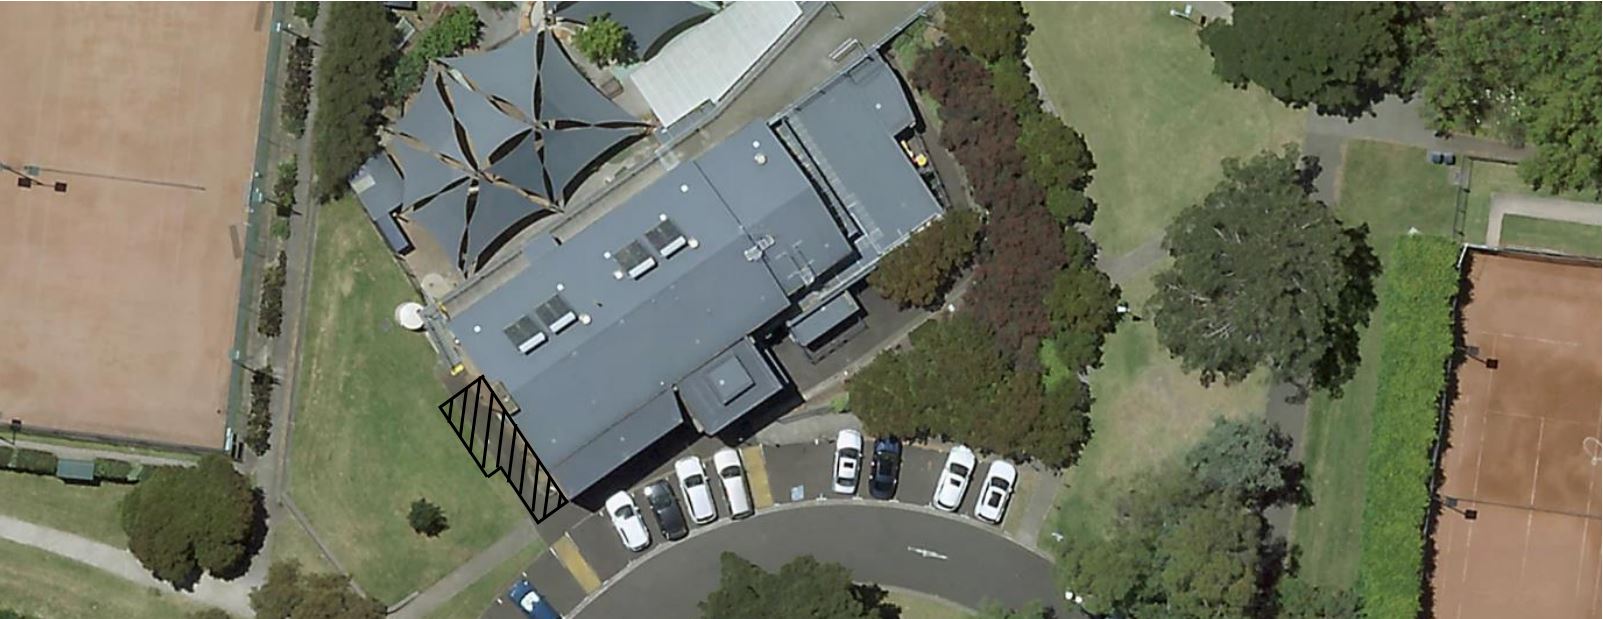 Looking down from a birds eye view on the Anderson Park Community Hub, showing a marked area to the left of the building close to the car park where the building will be extended